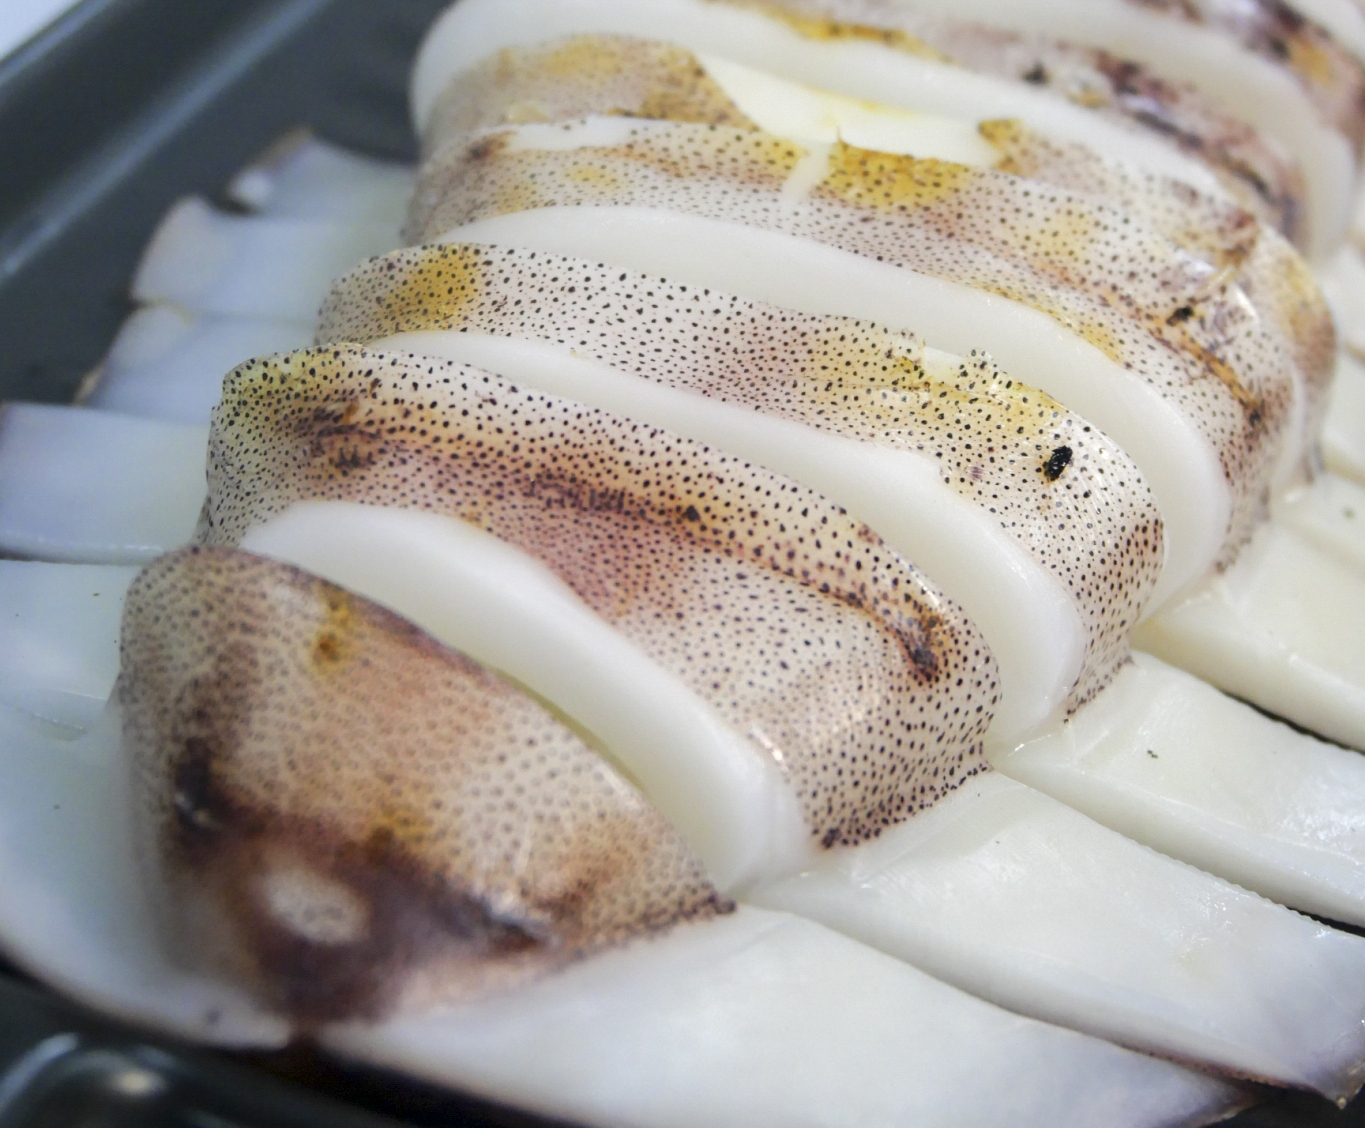 You are currently viewing The difference between market squid and fresh squid